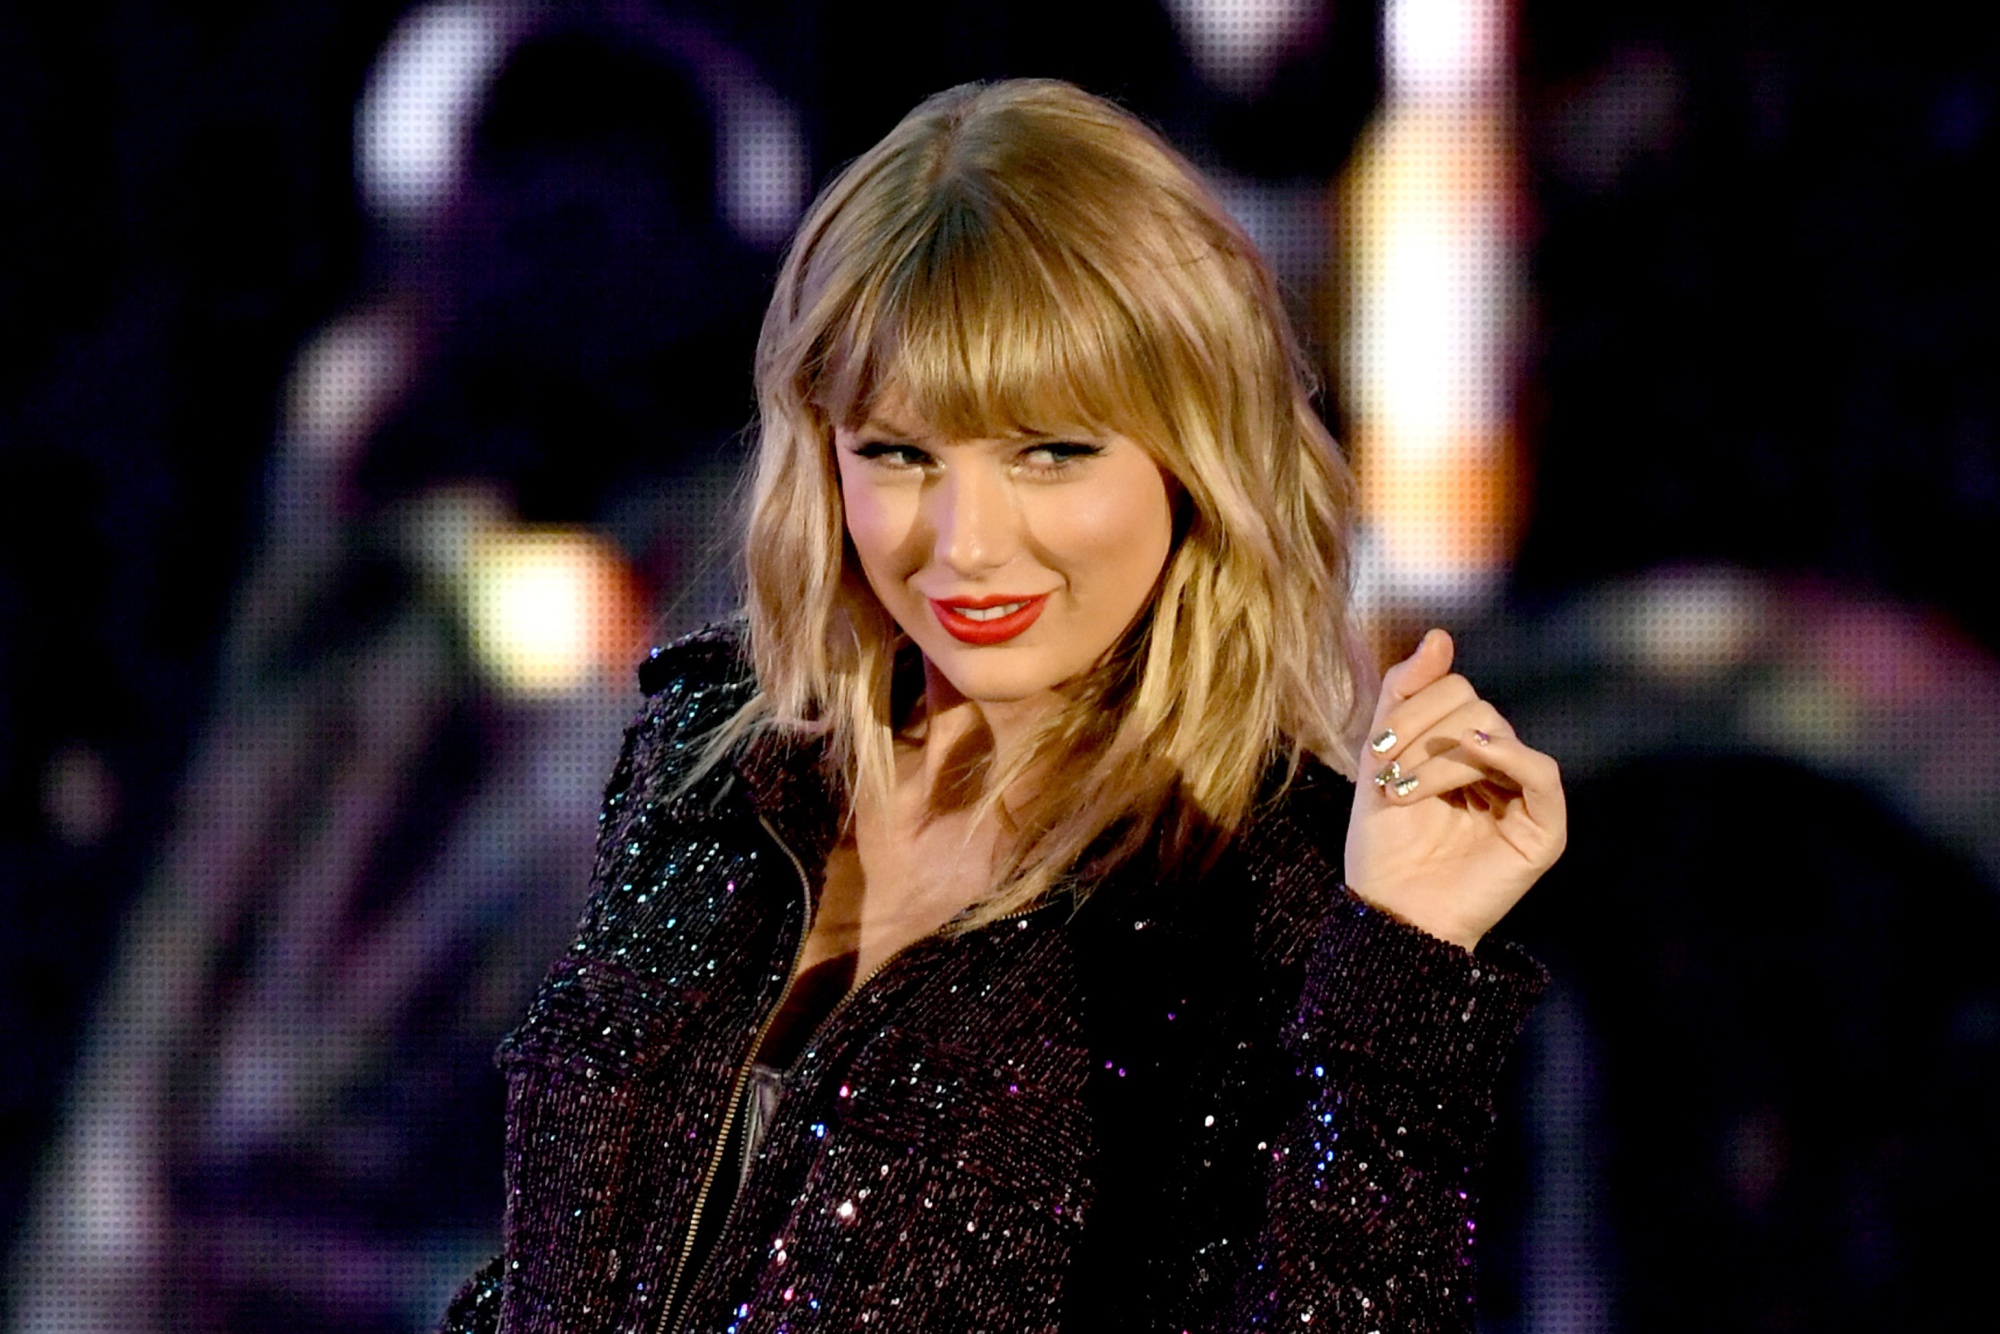 Taylor Swift Controversies Through the Years: Lawsuits and More